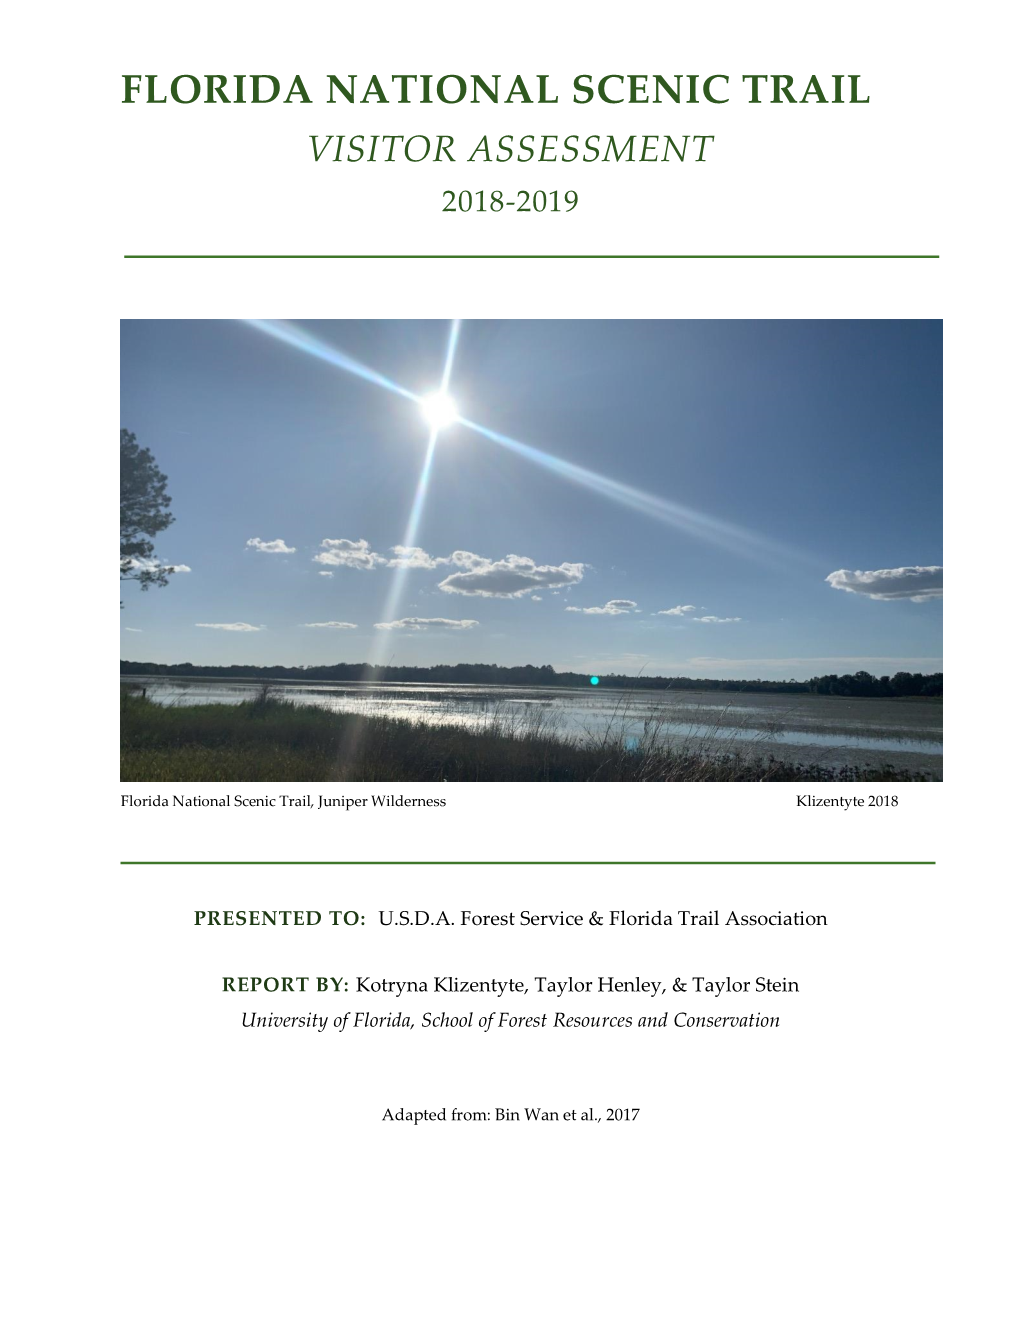 Florida National Scenic Trail Visitor Assessment 2018-2019